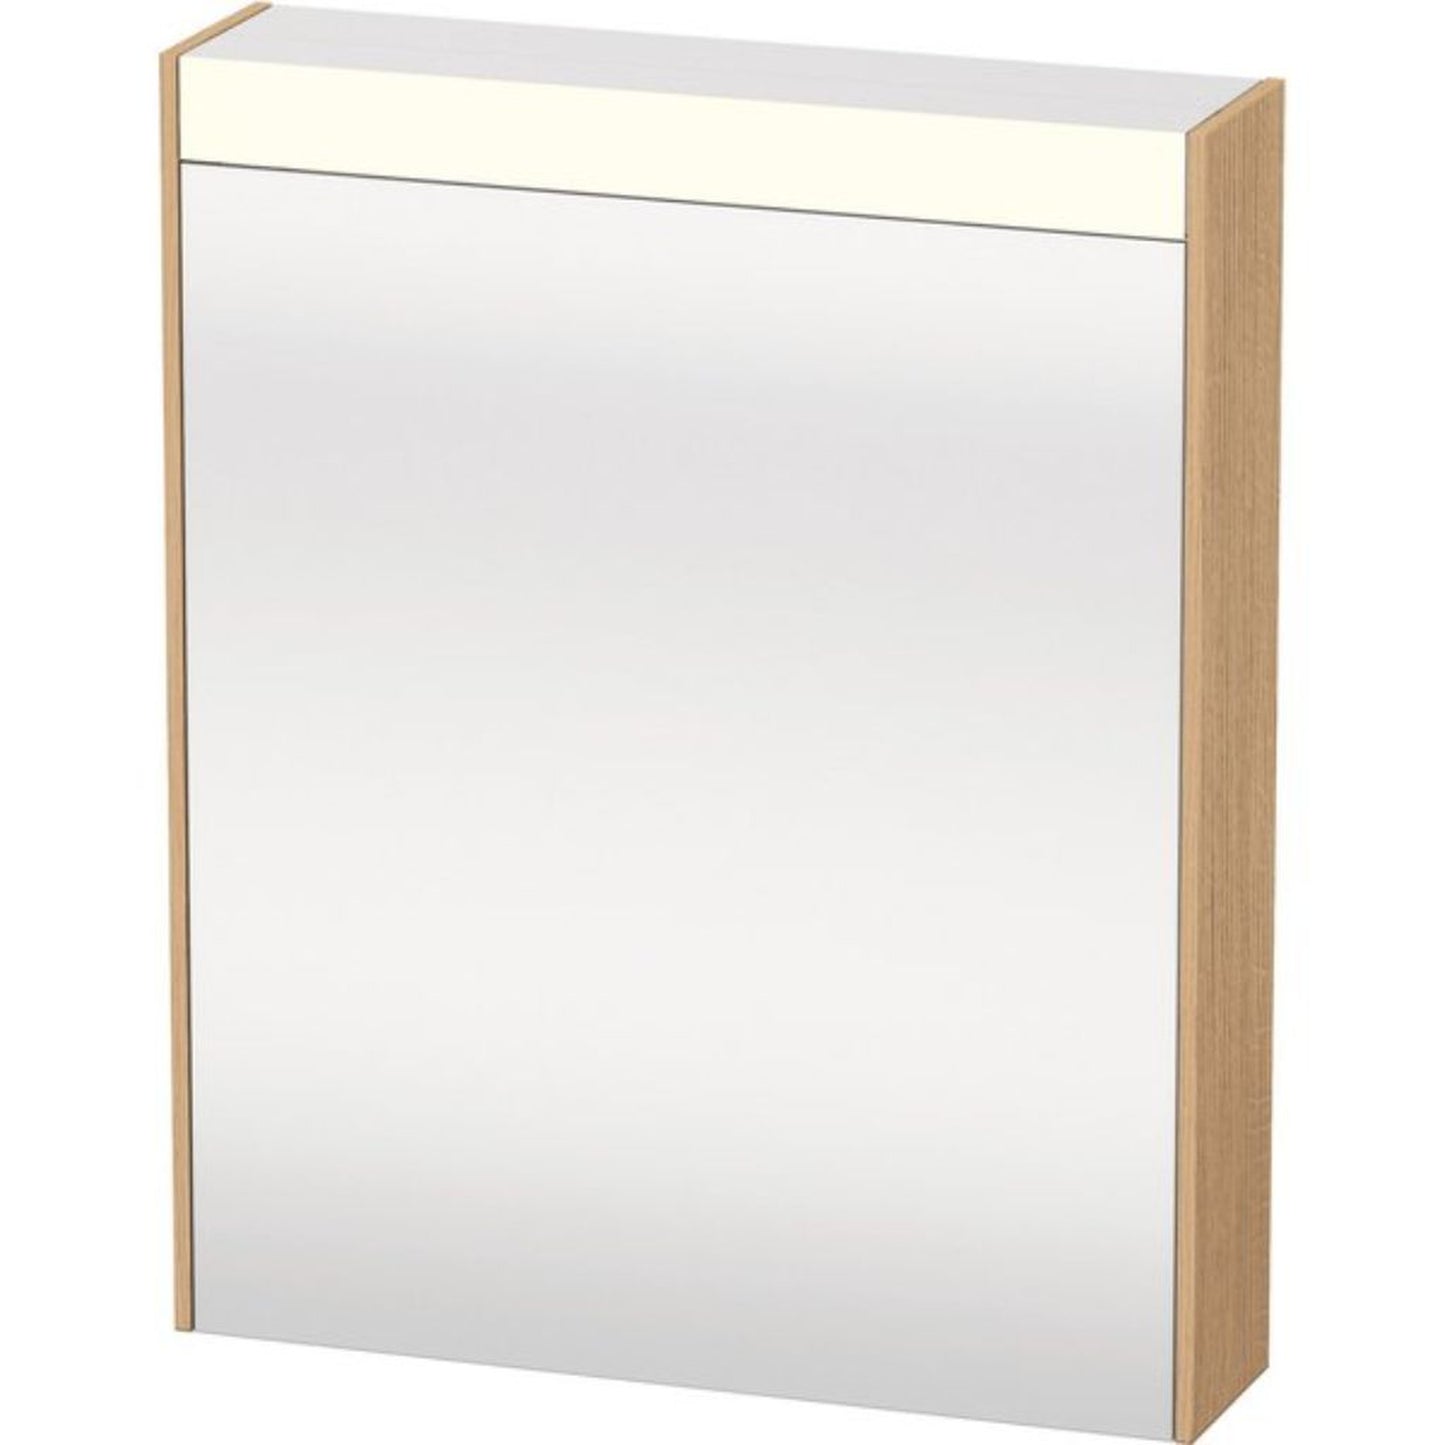 Duravit Brioso 24" x 30" x 6" Mirror With Right Hinge Cabinet and Lighting Natural Oak